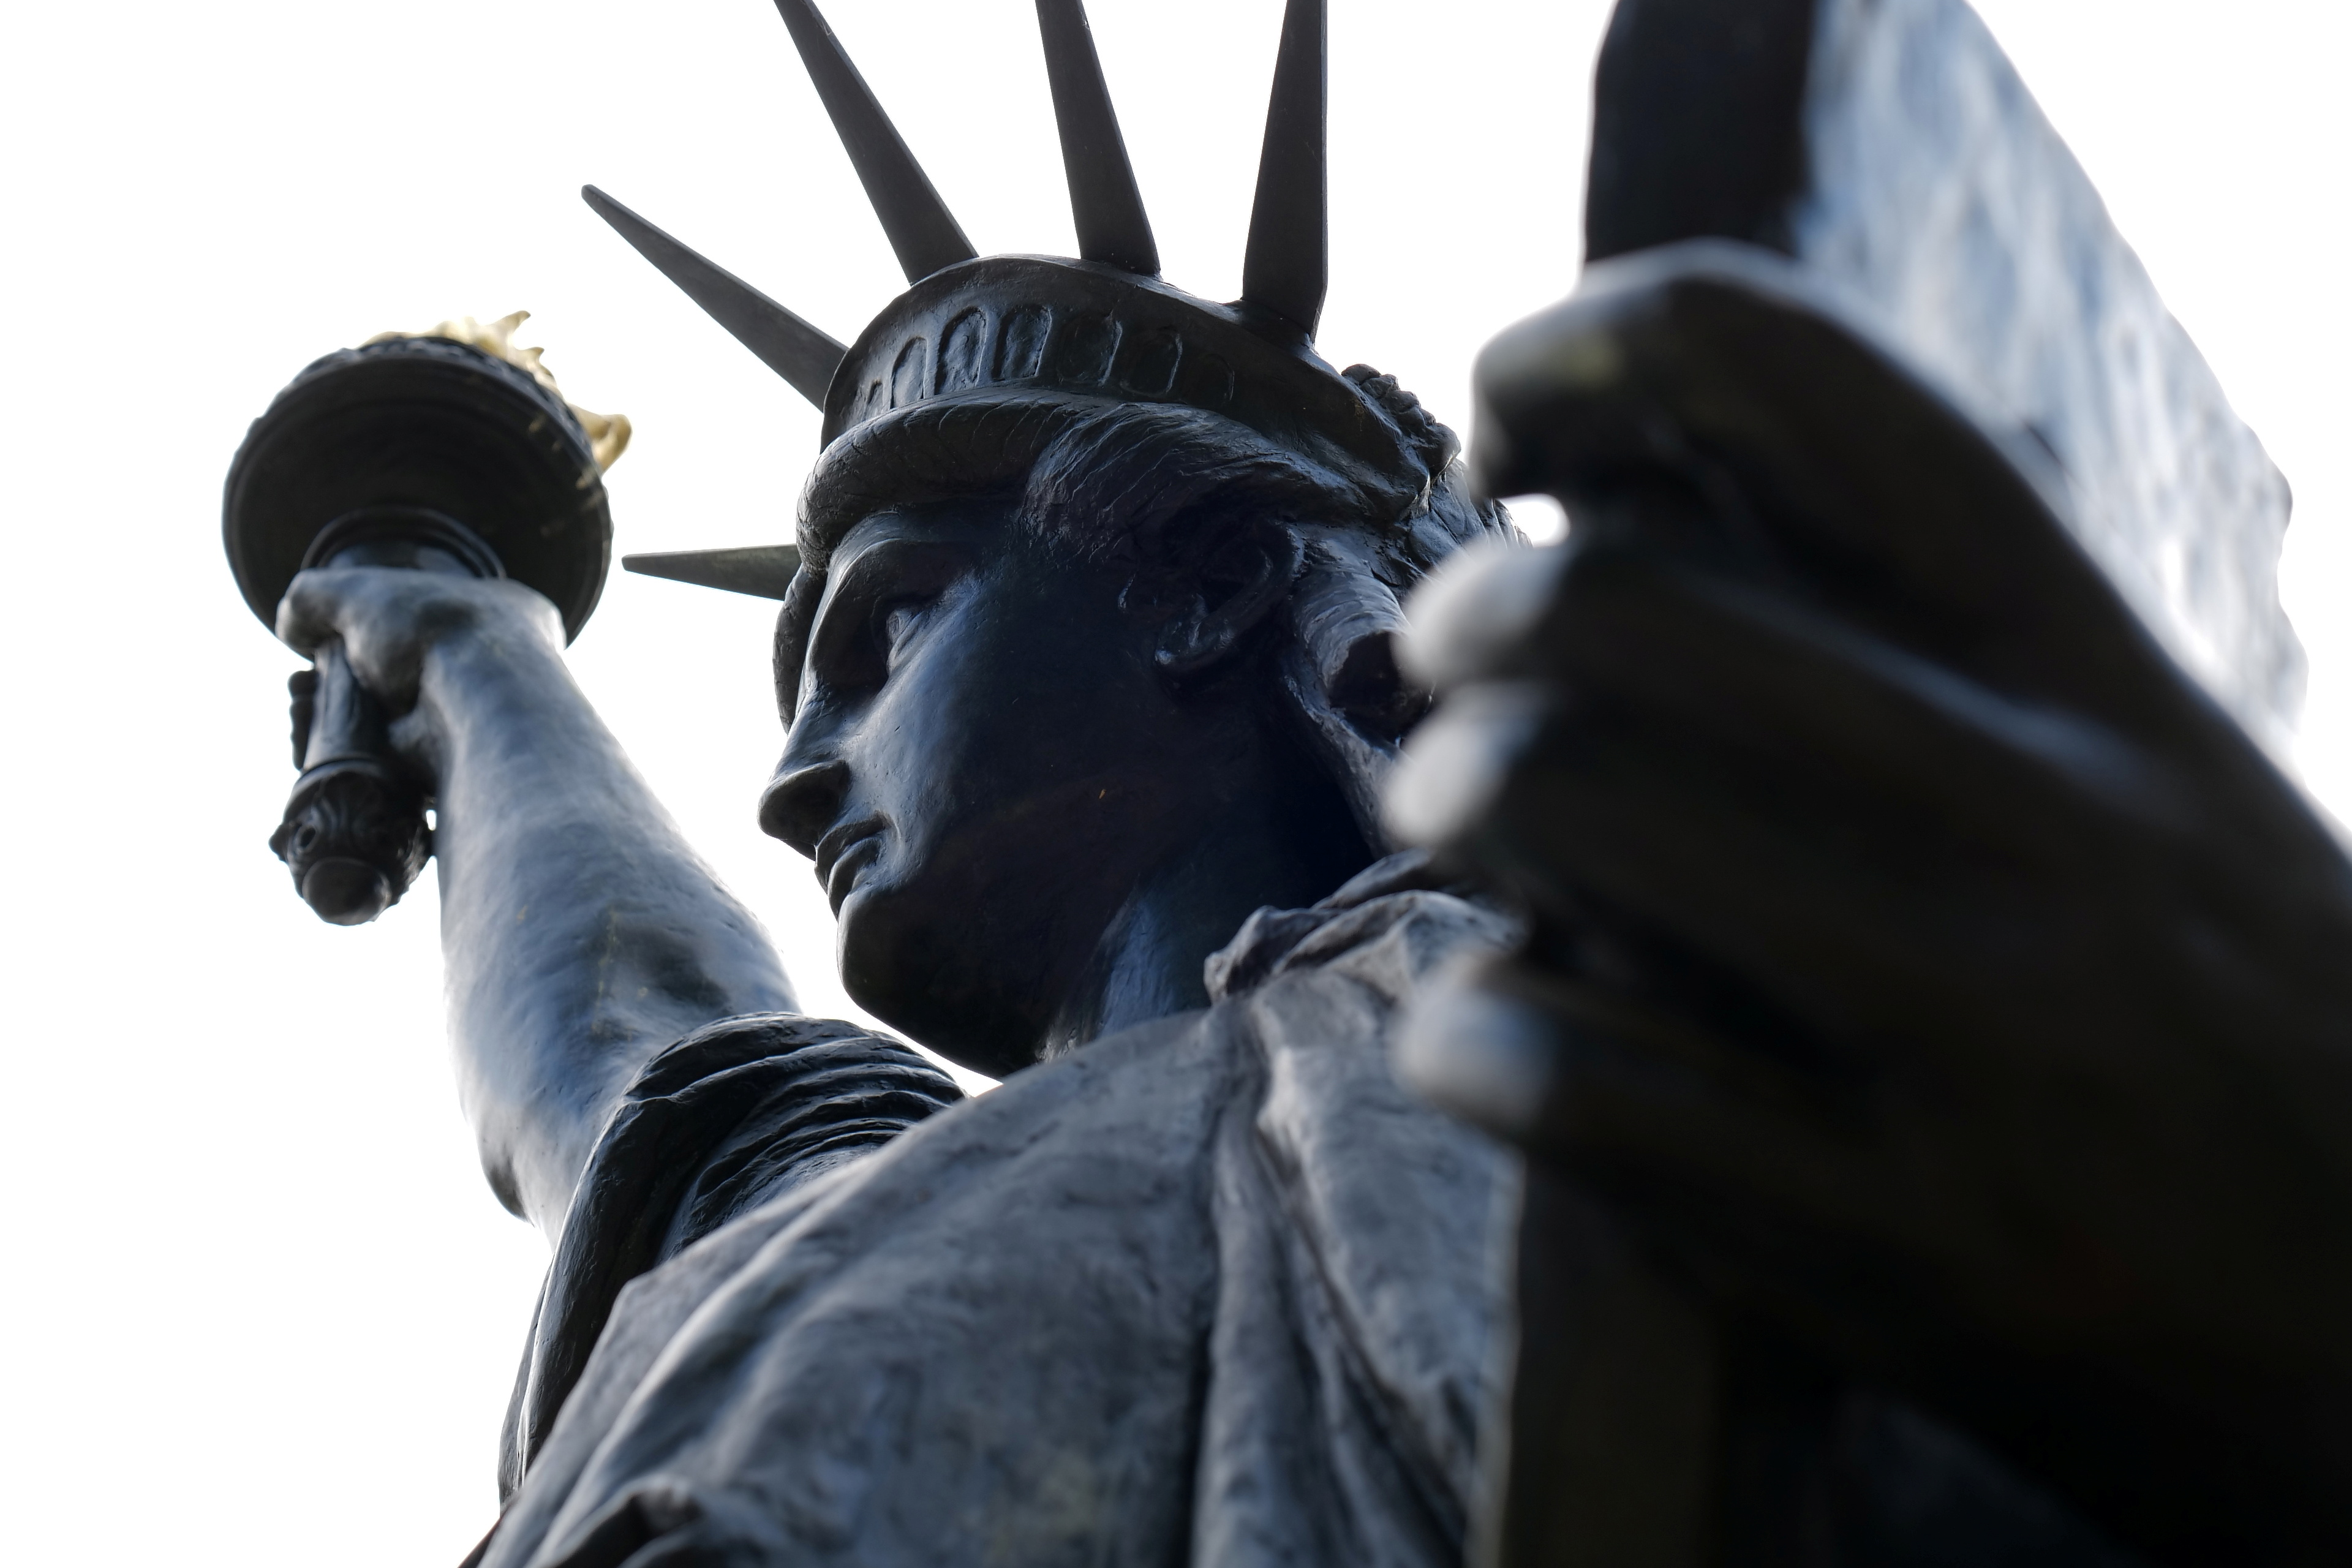 French museum to send U.S. second Lady Liberty to rekindle friendship